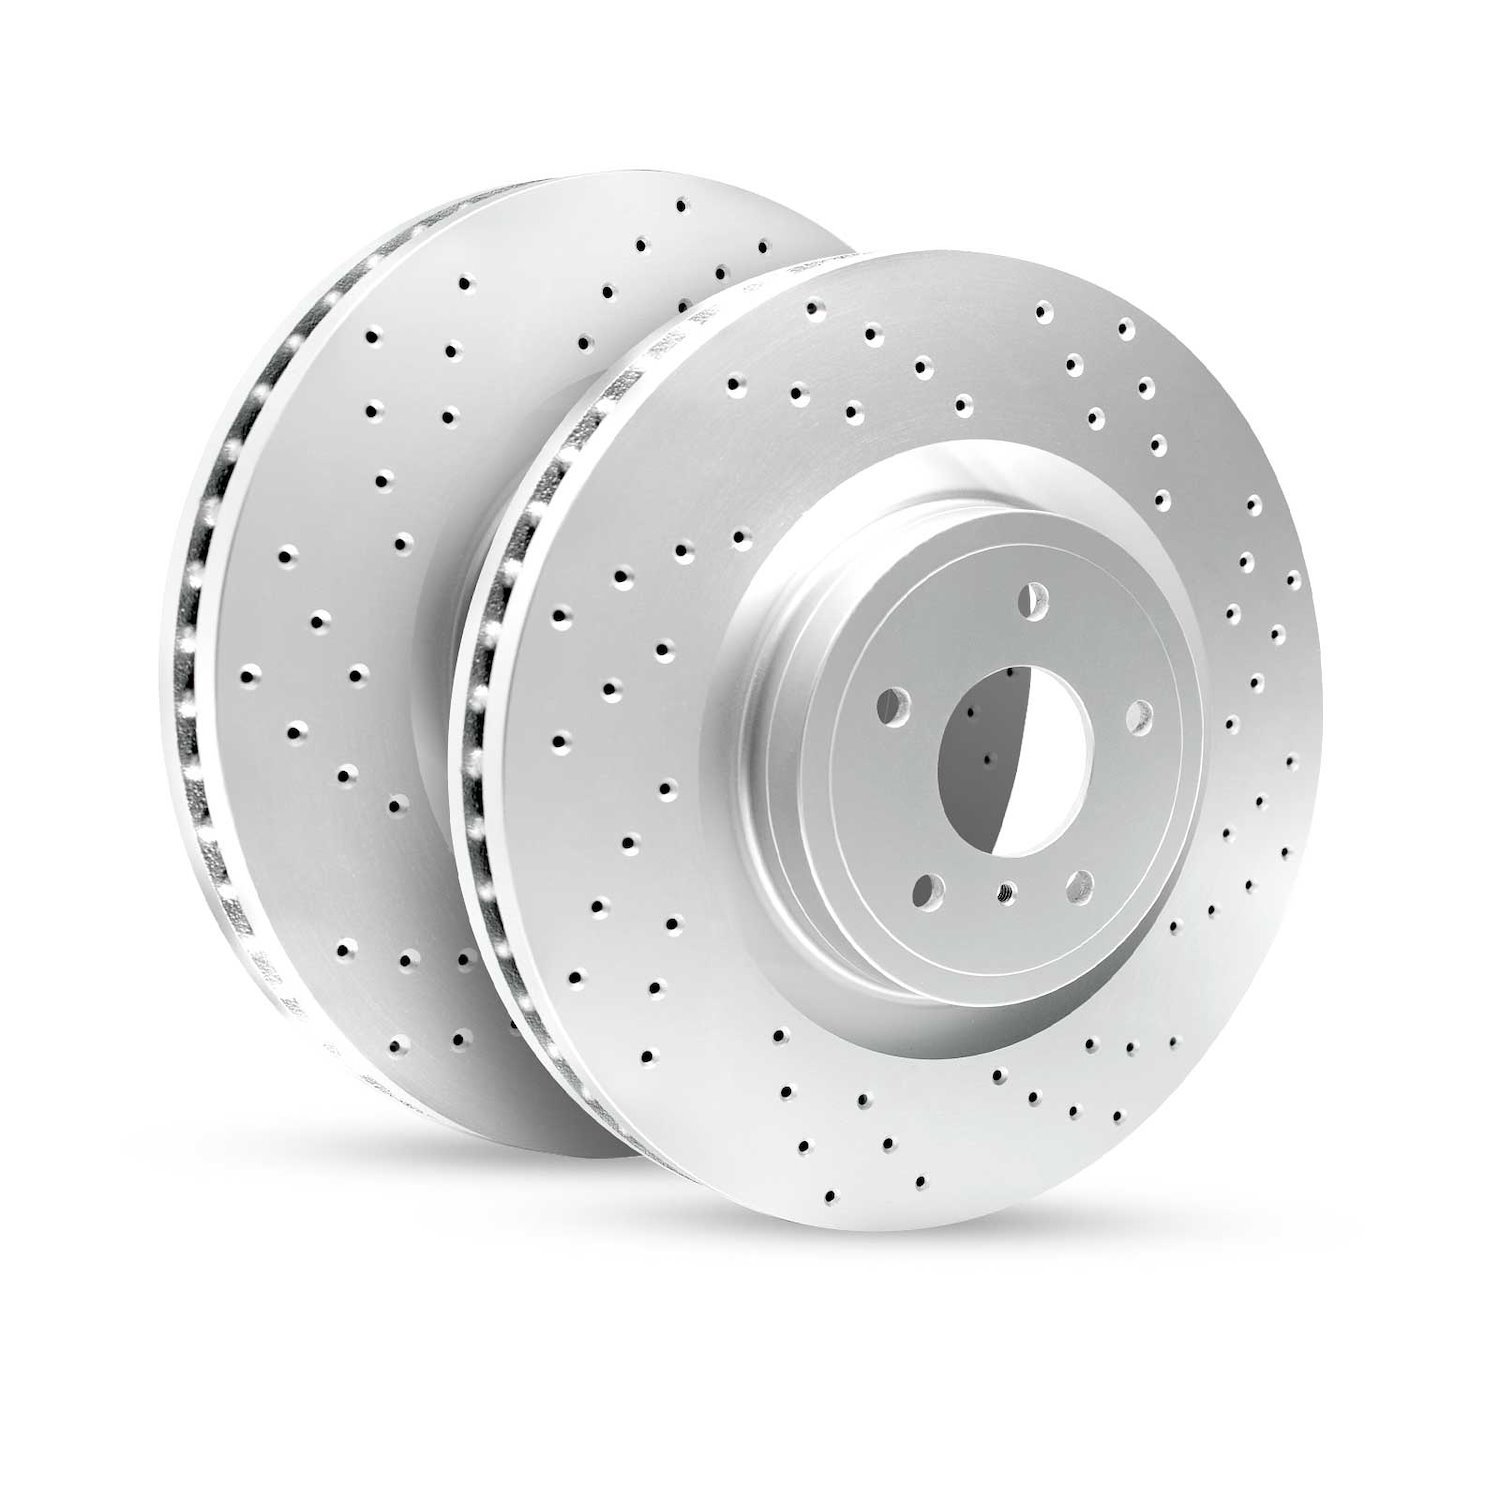 GEO-Carbon Drilled/Slotted Rotors, 1990-2001 Ford/Mazda,